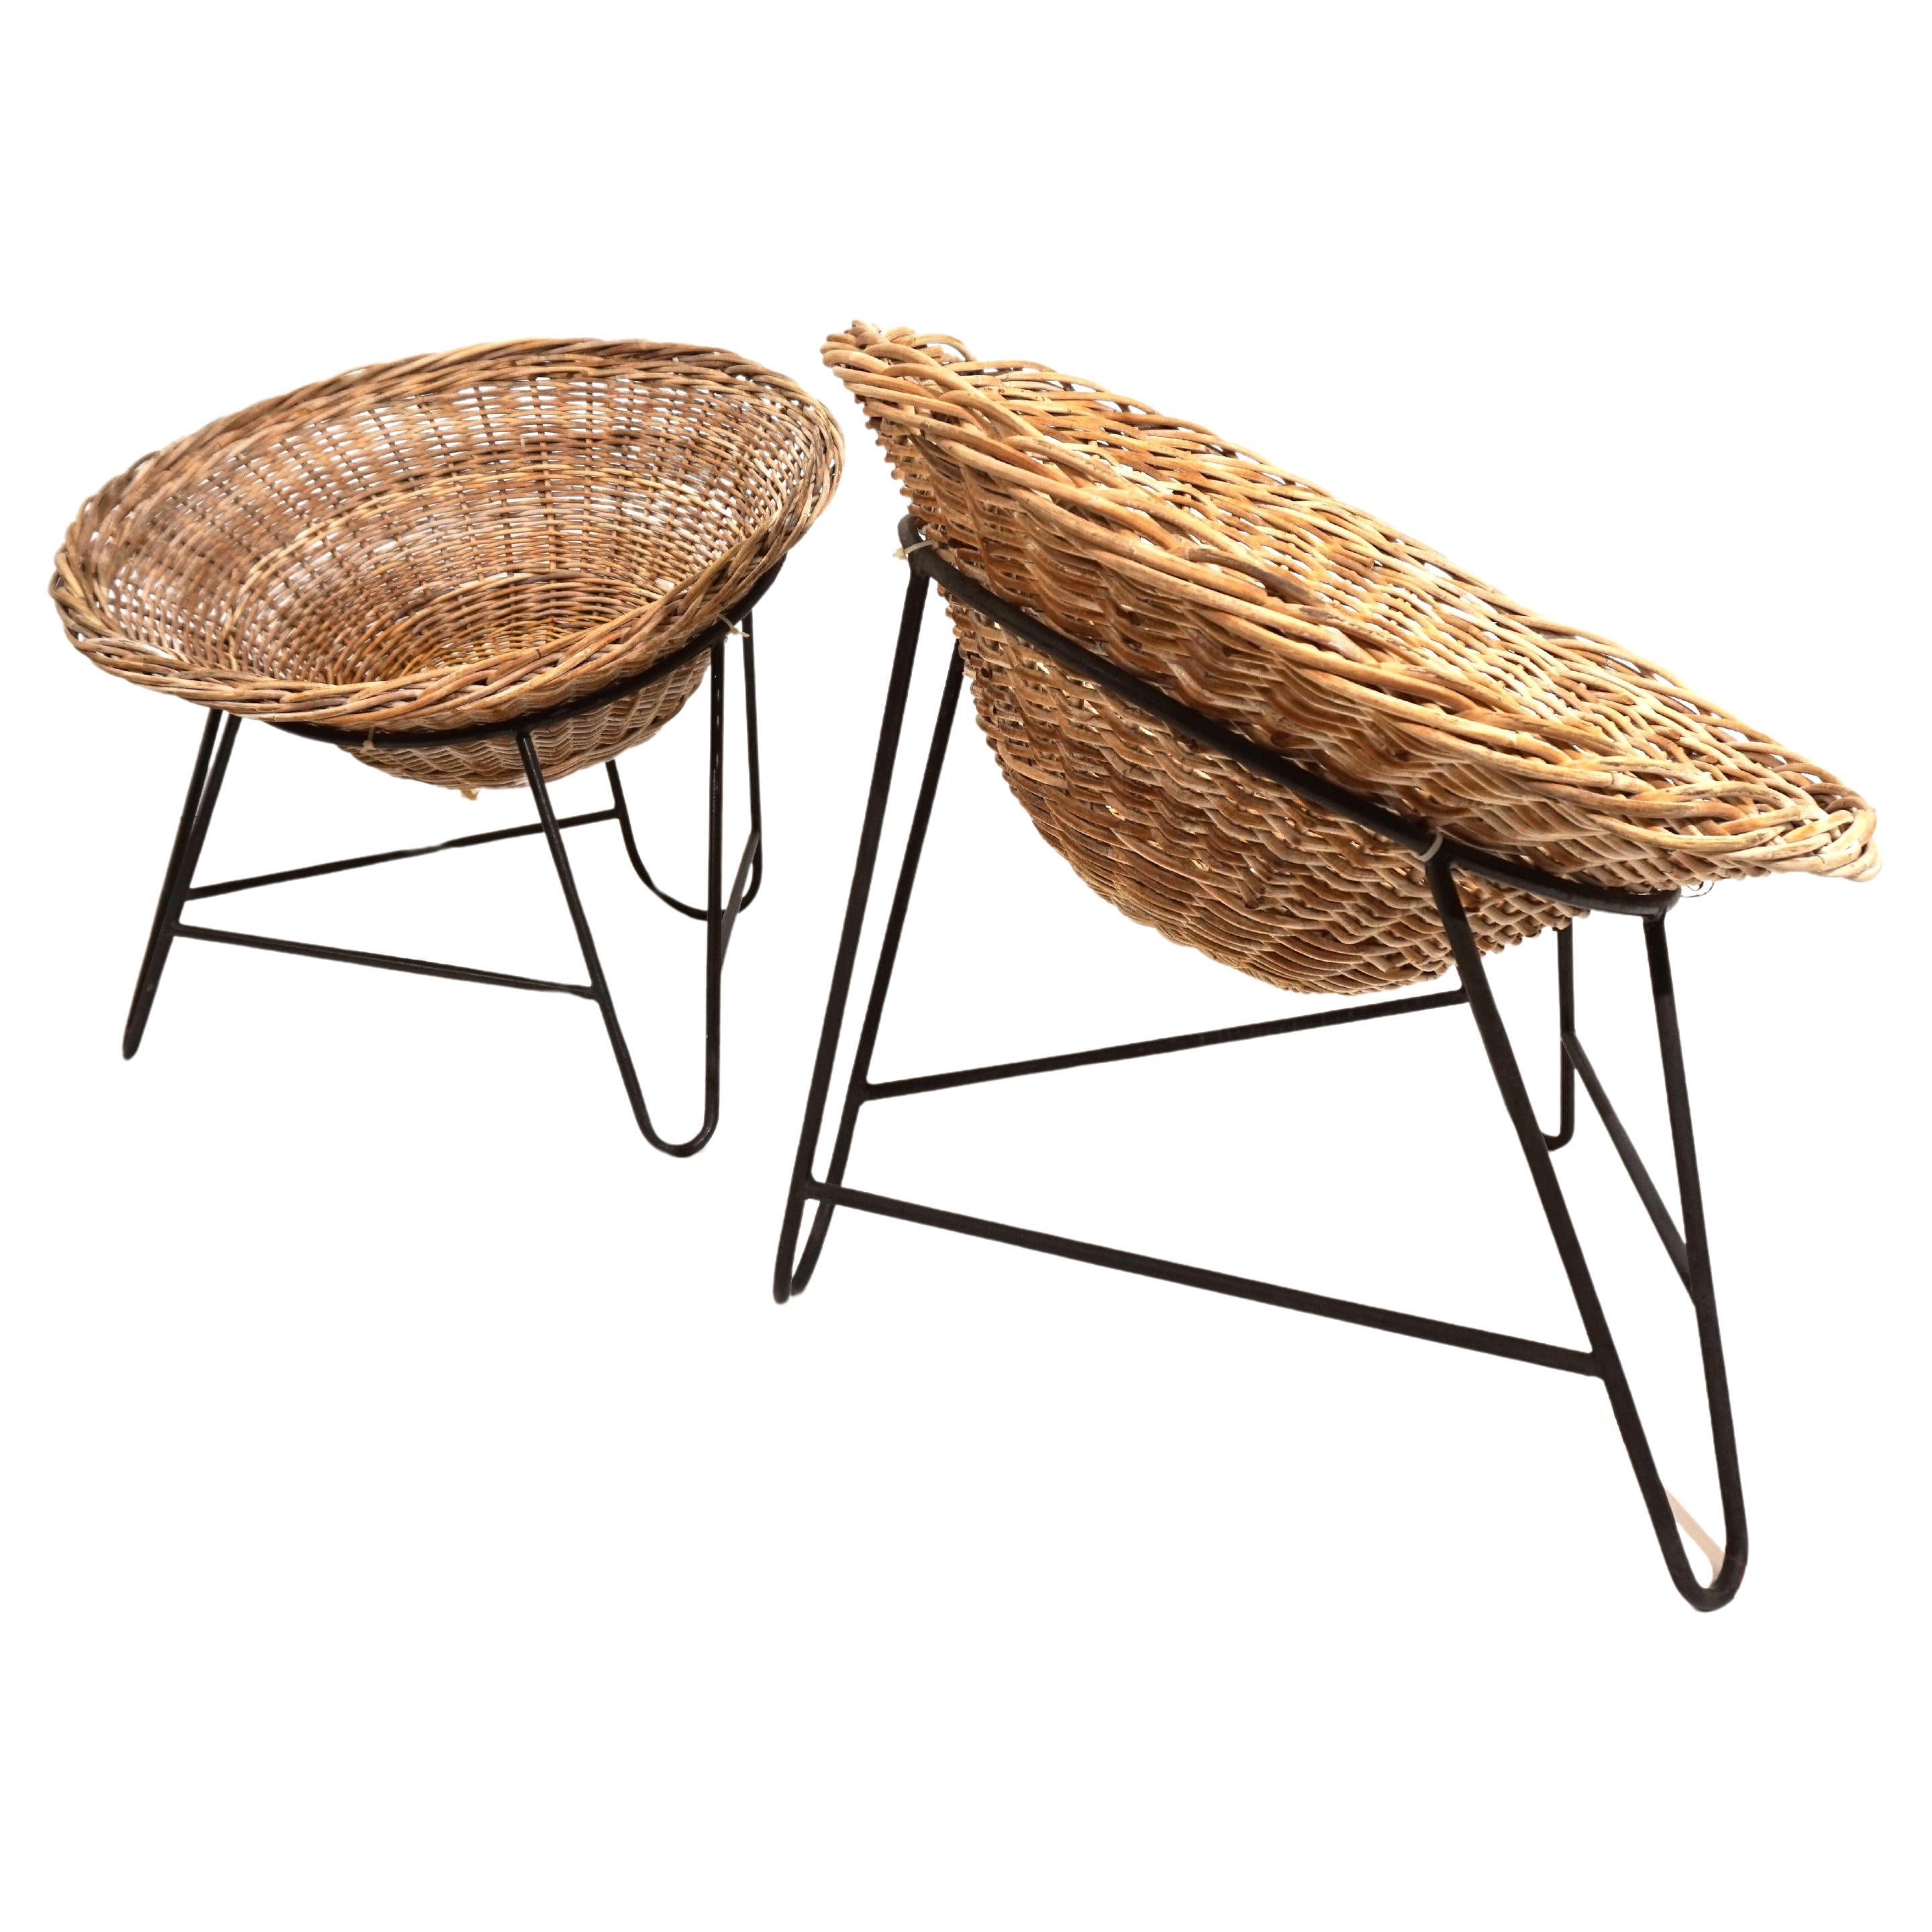 Set of 2 wicker pod chairs from the 60s For Sale